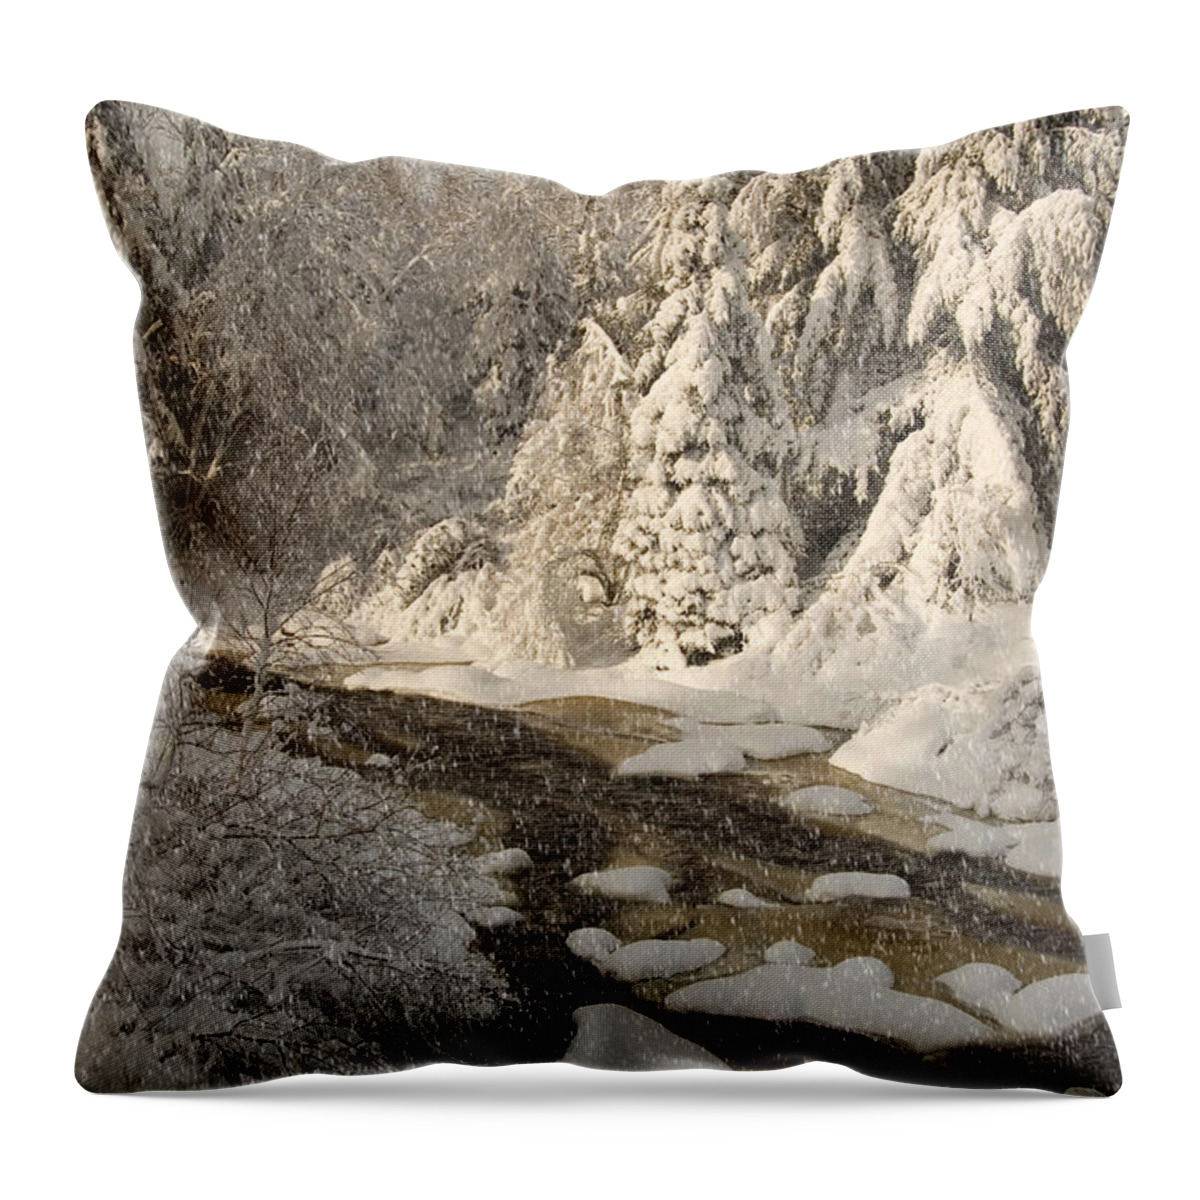 Snow Throw Pillow featuring the photograph Fresh Snow by Alana Ranney